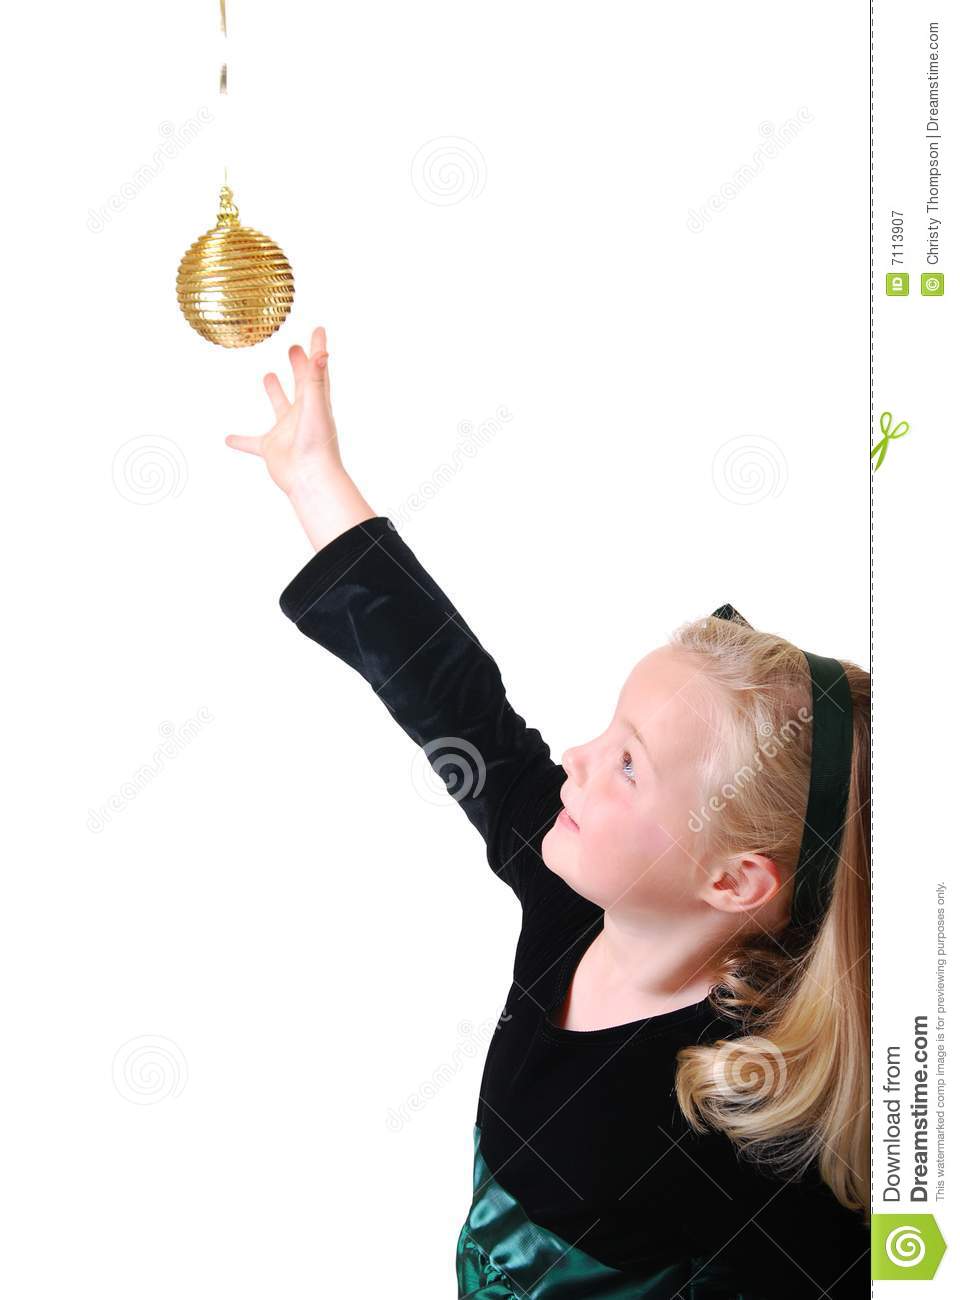 Girl Reaching For Ornament Royalty Free Stock Photography   Image